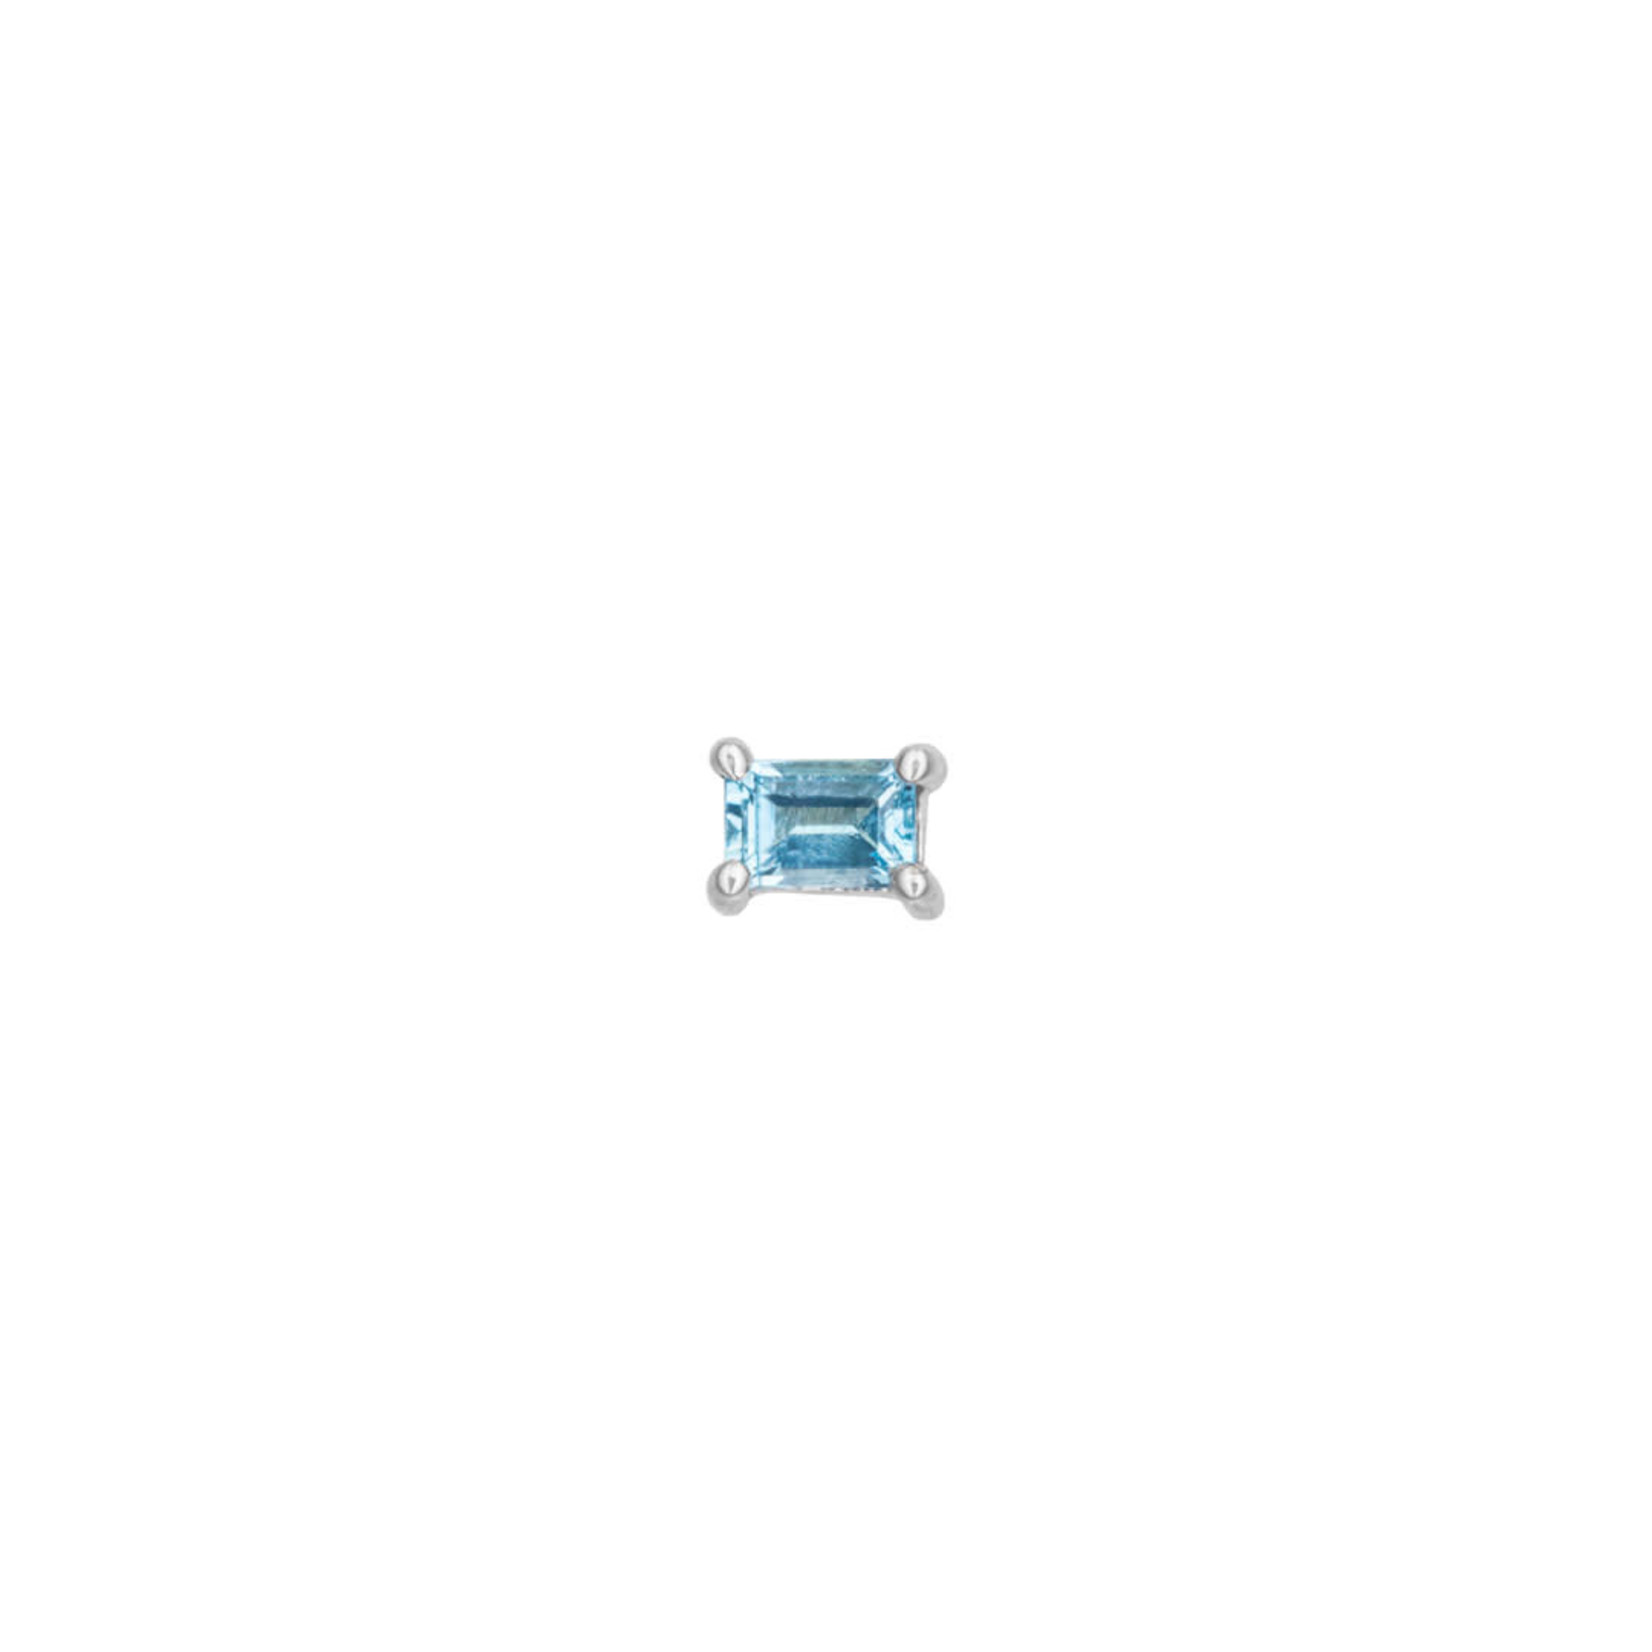 BVLA BVLA press fit prong baguette with 3x2 Swiss blue topaz